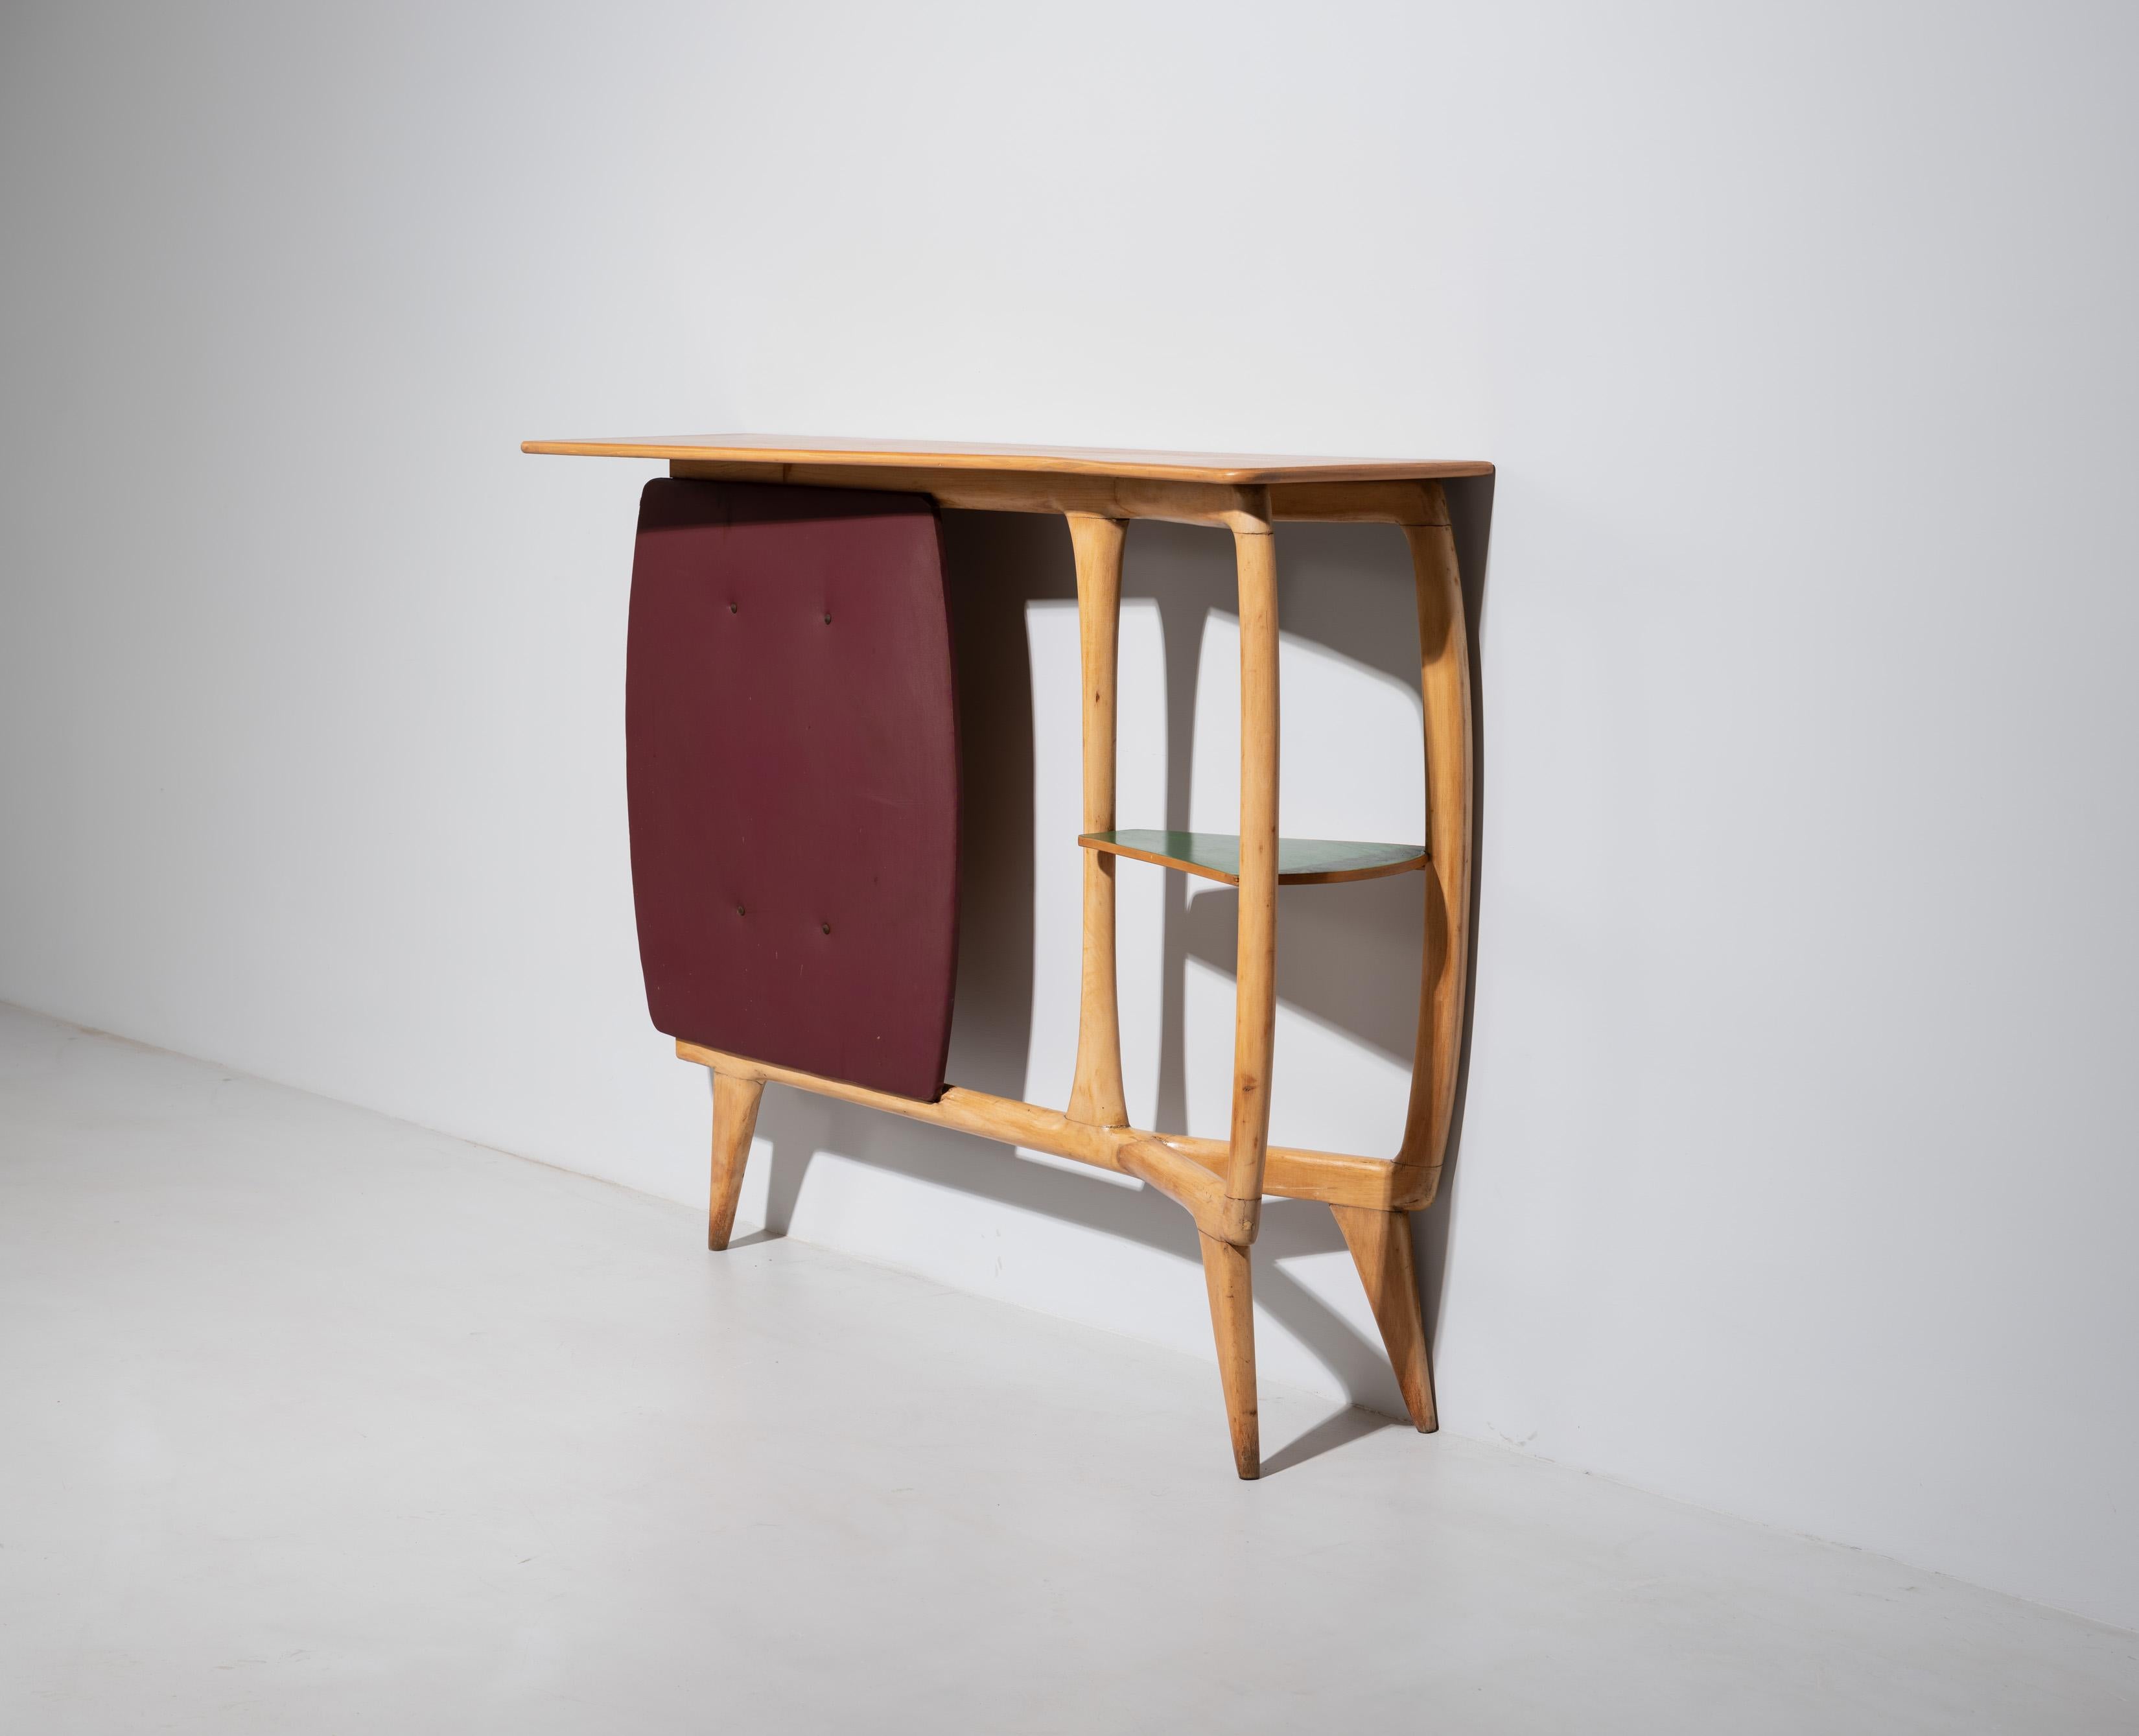 Mid-20th Century Console of Italian Design from the 1950s, Maple Wood with a Sculptural Shape